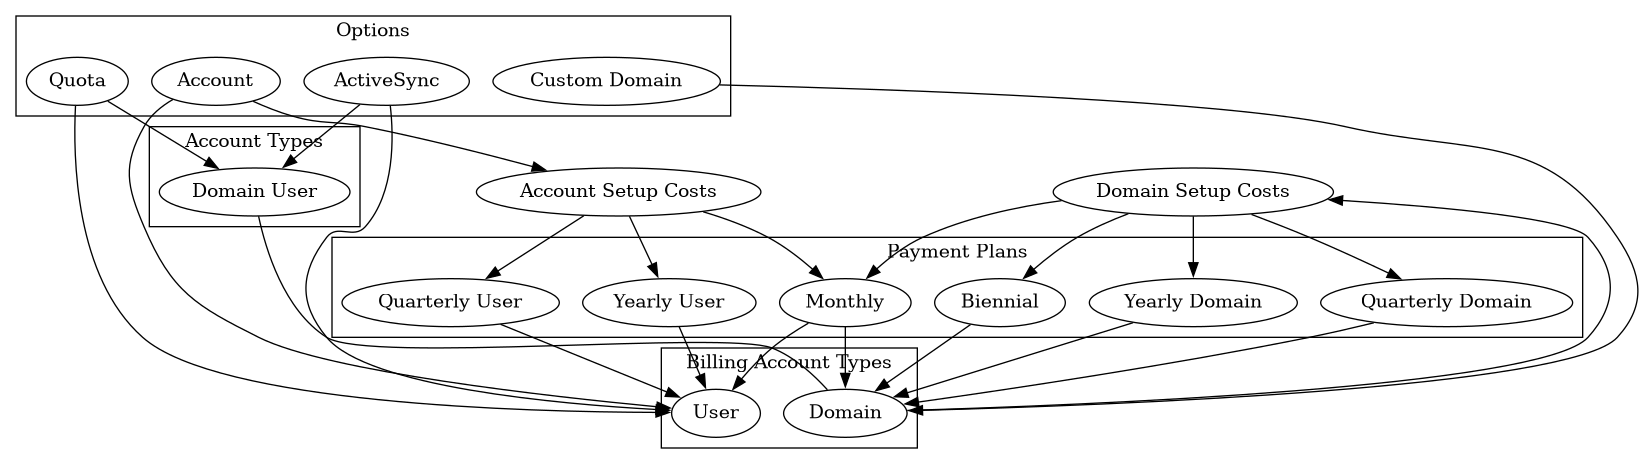 digraph {

        subgraph cluster_options {
                label = "Options";
                "Account";
                "Quota";
                "ActiveSync";
                "Custom Domain";
            }

        subgraph cluster_billing_account_types {
                label = "Billing Account Types";
                "User";
                "Domain";
            }

        subgraph cluster_account_types {
                label = "Account Types";
                "Domain User";
            }

        subgraph cluster_paymentplans {
                label = "Payment Plans";
                "Monthly";
                "Quarterly User";
                "Quarterly Domain";
                "Yearly User";
                "Yearly Domain";
                "Biennial";
            }

        "Account", "Quota", "ActiveSync" -> "User";
        "Custom Domain" -> "Domain";
        "Quota", "ActiveSync" -> "Domain User";
        "Domain User" -> "Domain" [dir=none];

        "Account" -> "Account Setup Costs";
        "Domain" -> "Domain Setup Costs";

        "Account Setup Costs" -> "Monthly", "Quarterly User", "Yearly User";
        "Domain Setup Costs" -> "Monthly", "Quarterly Domain", "Yearly Domain", "Biennial";

        "Monthly", "Quarterly User", "Yearly User" -> "User";
        "Monthly", "Quarterly Domain", "Yearly Domain", "Biennial" -> "Domain";
    }